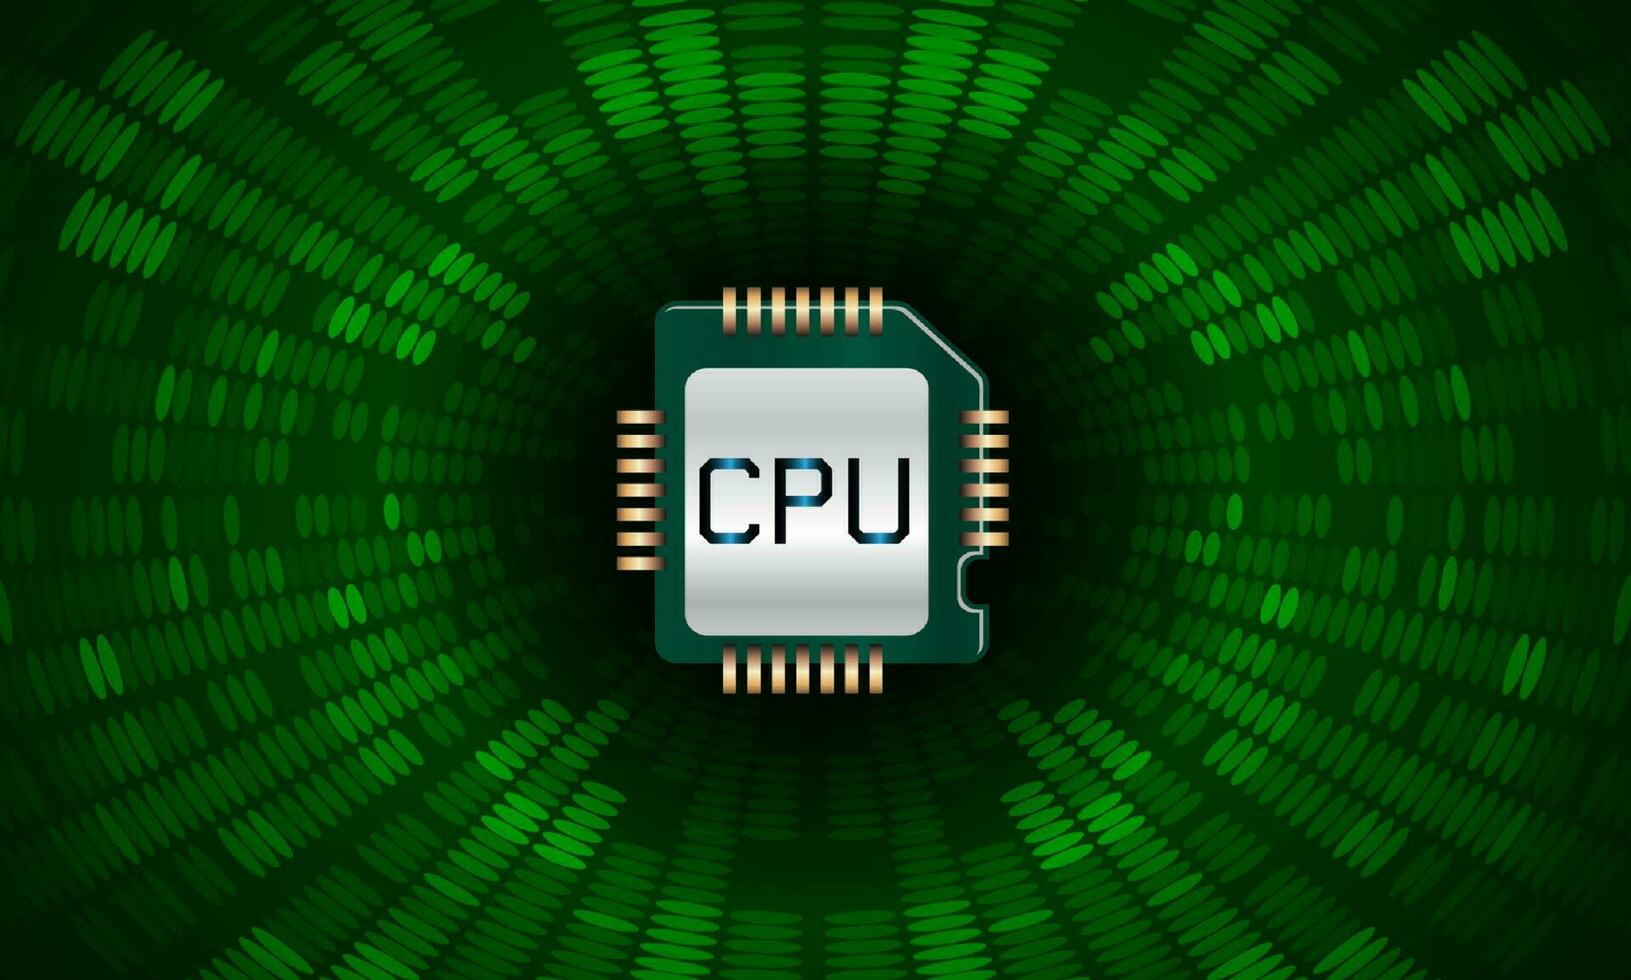 Modern Cybersecurity Technology Background with cpu chip vector